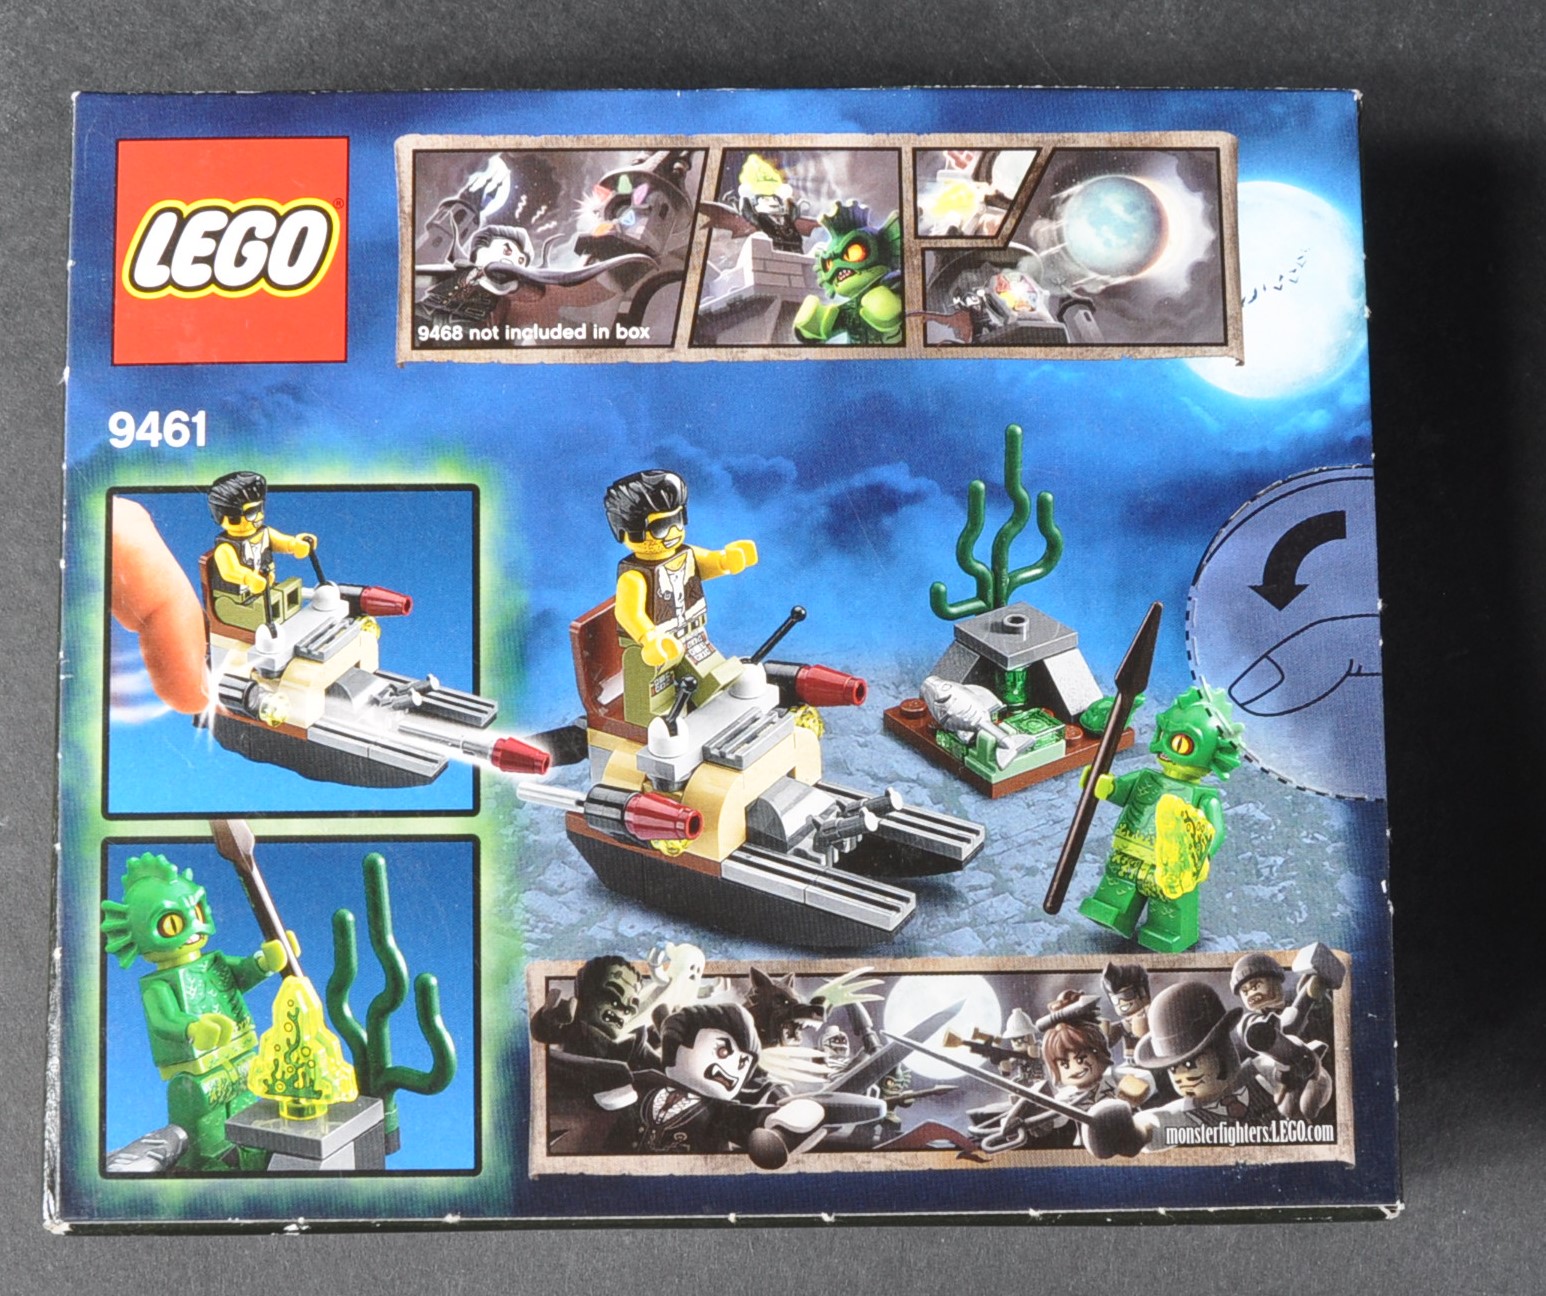 LEGO SETS - MONSTER FIGHTERS - 9461 - THE SWAMP CREATURE - Image 8 of 10